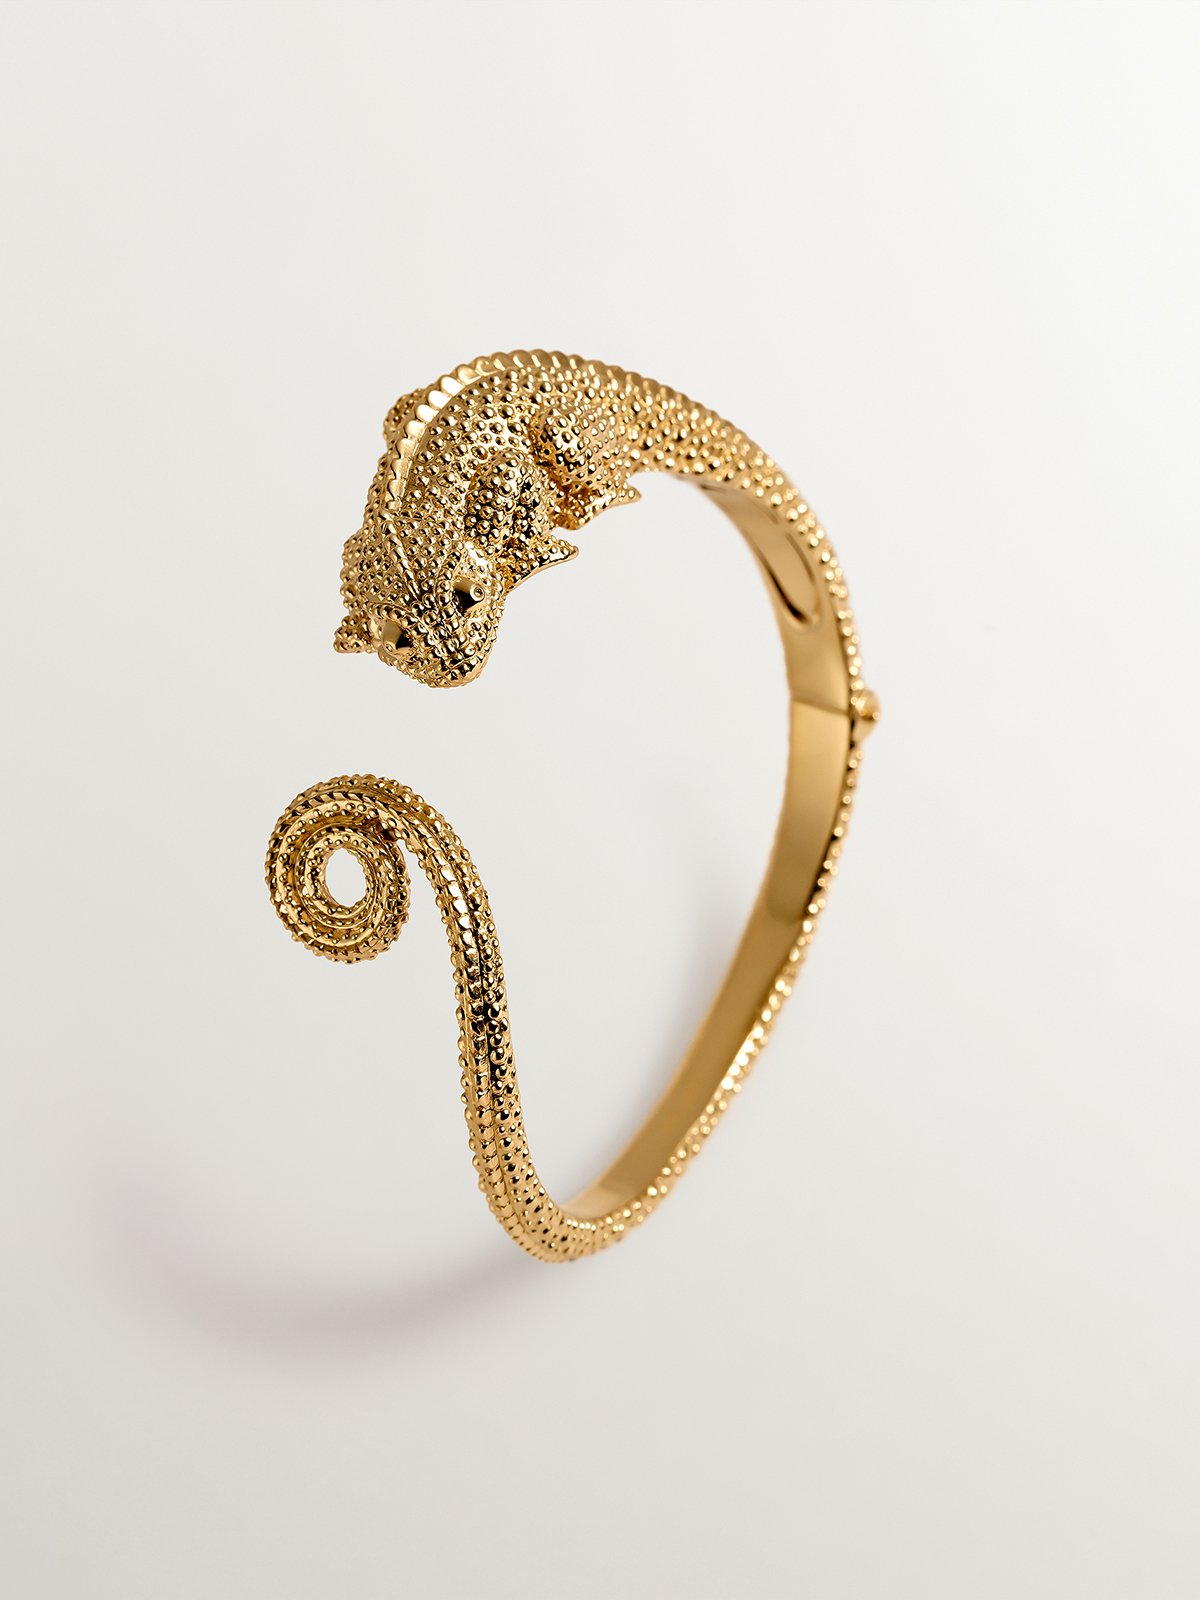 Rigid bracelet made of 925 silver, bathed in 18K yellow gold with a chameleon shape.